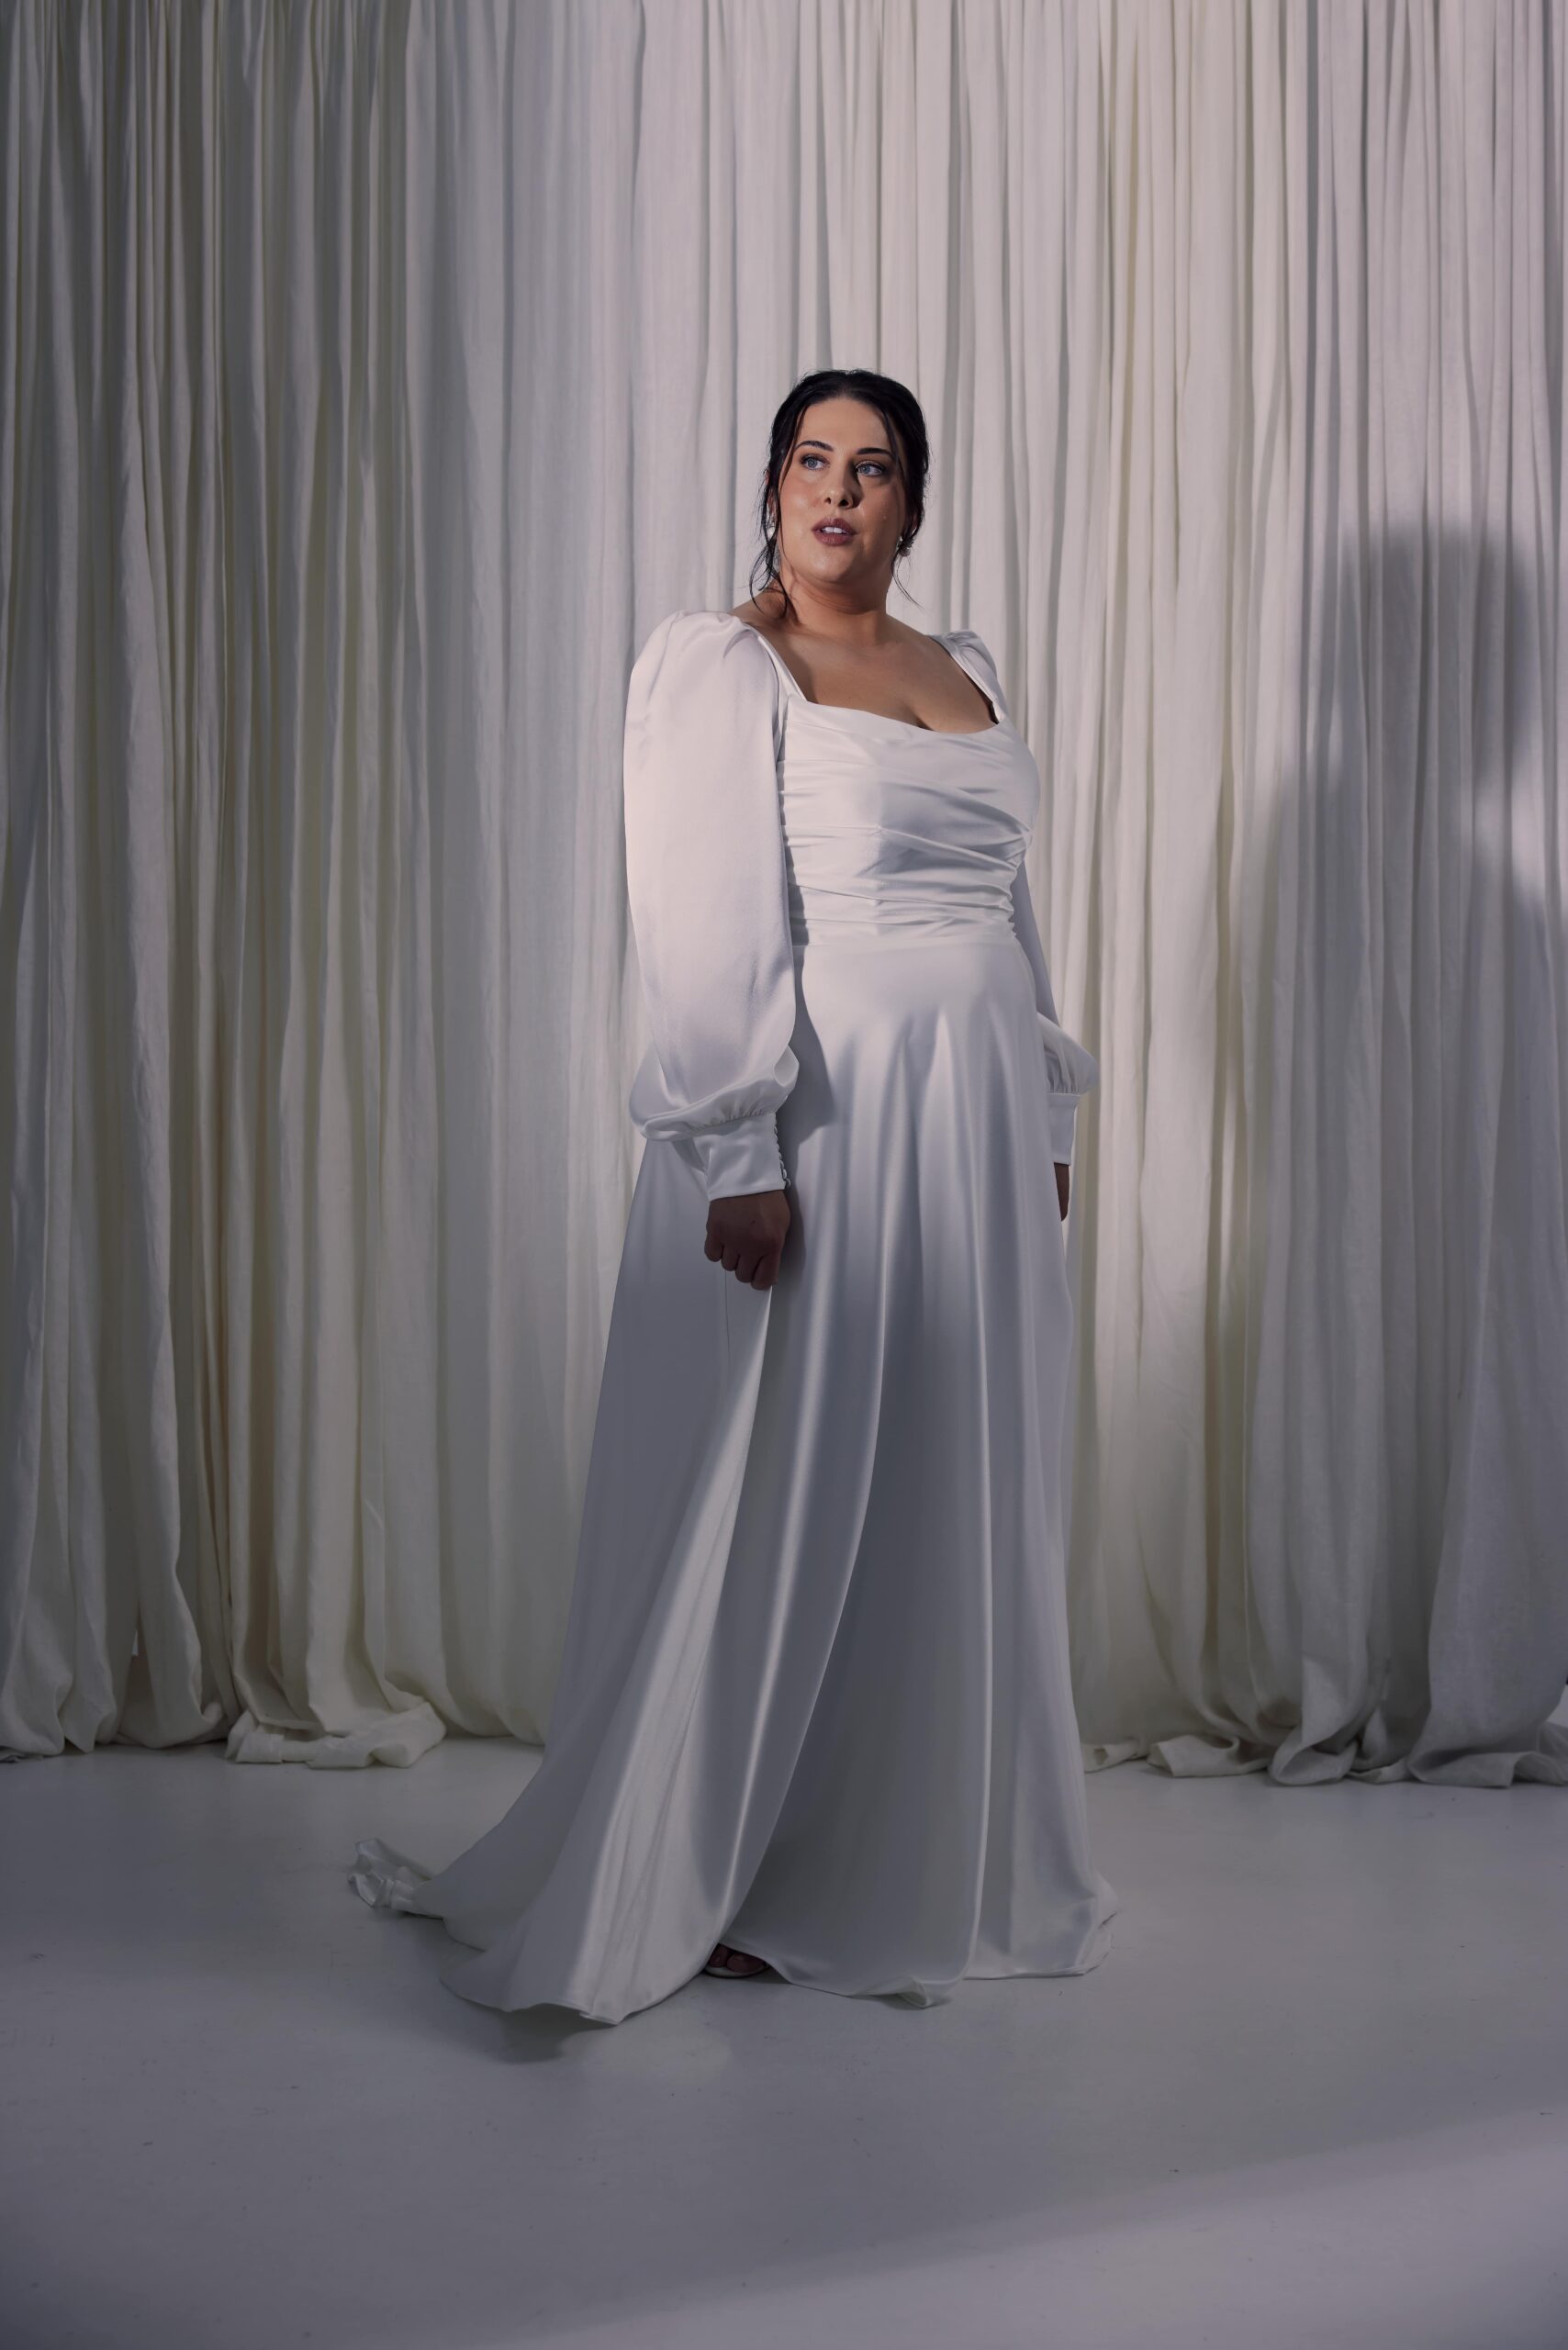 The Luna gown - a satin gown with soft bodice draping, soft bishop sleeves and a soft flowing a-line skirt.